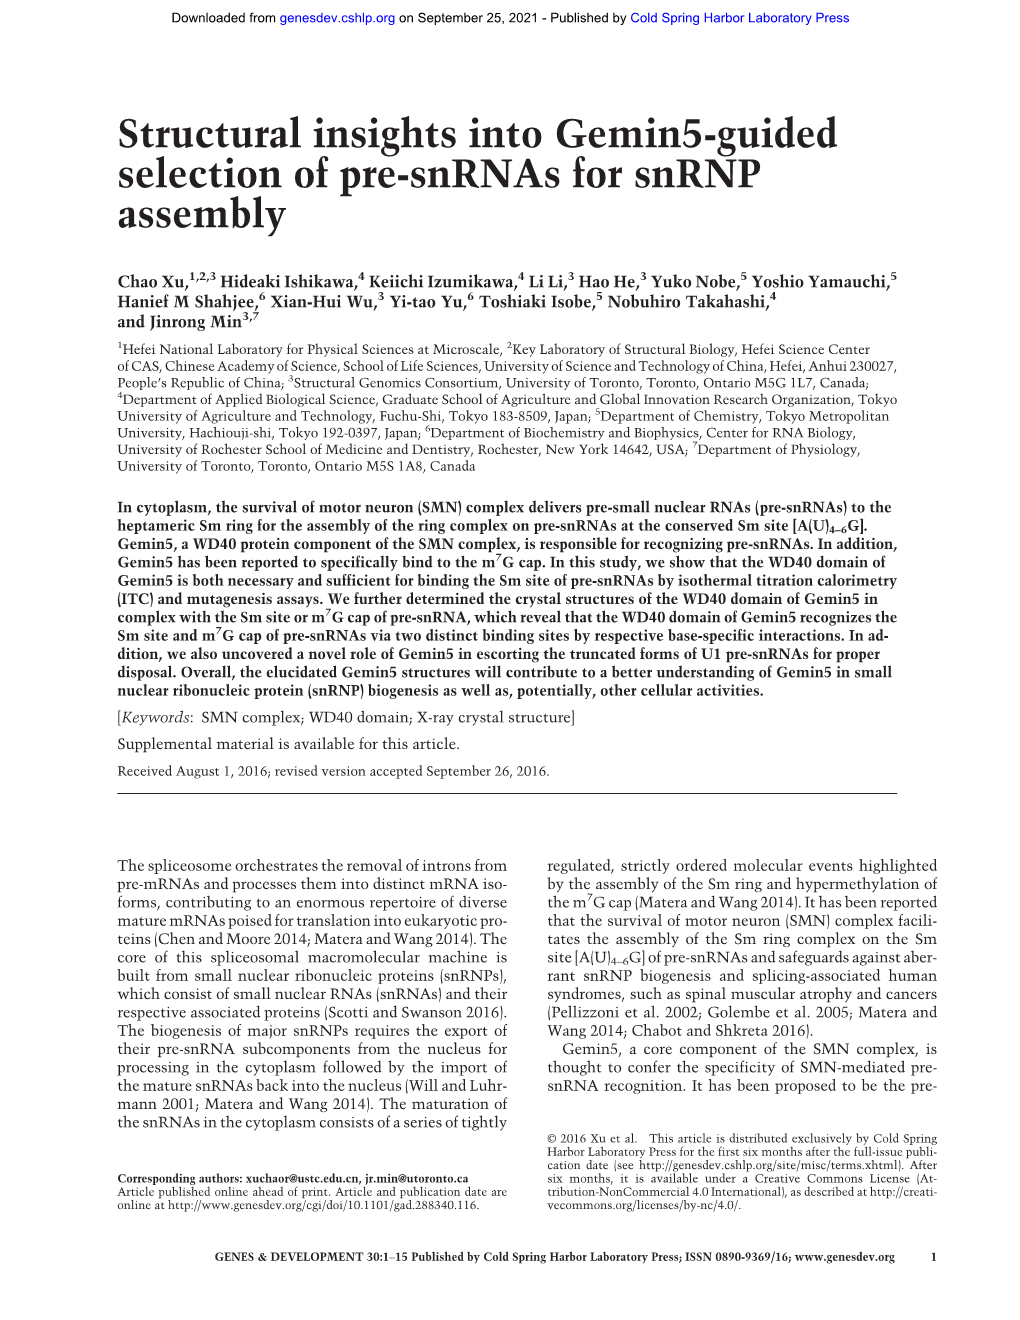 Structural Insights Into Gemin5-Guided Selection of Pre-Snrnas for Snrnp Assembly